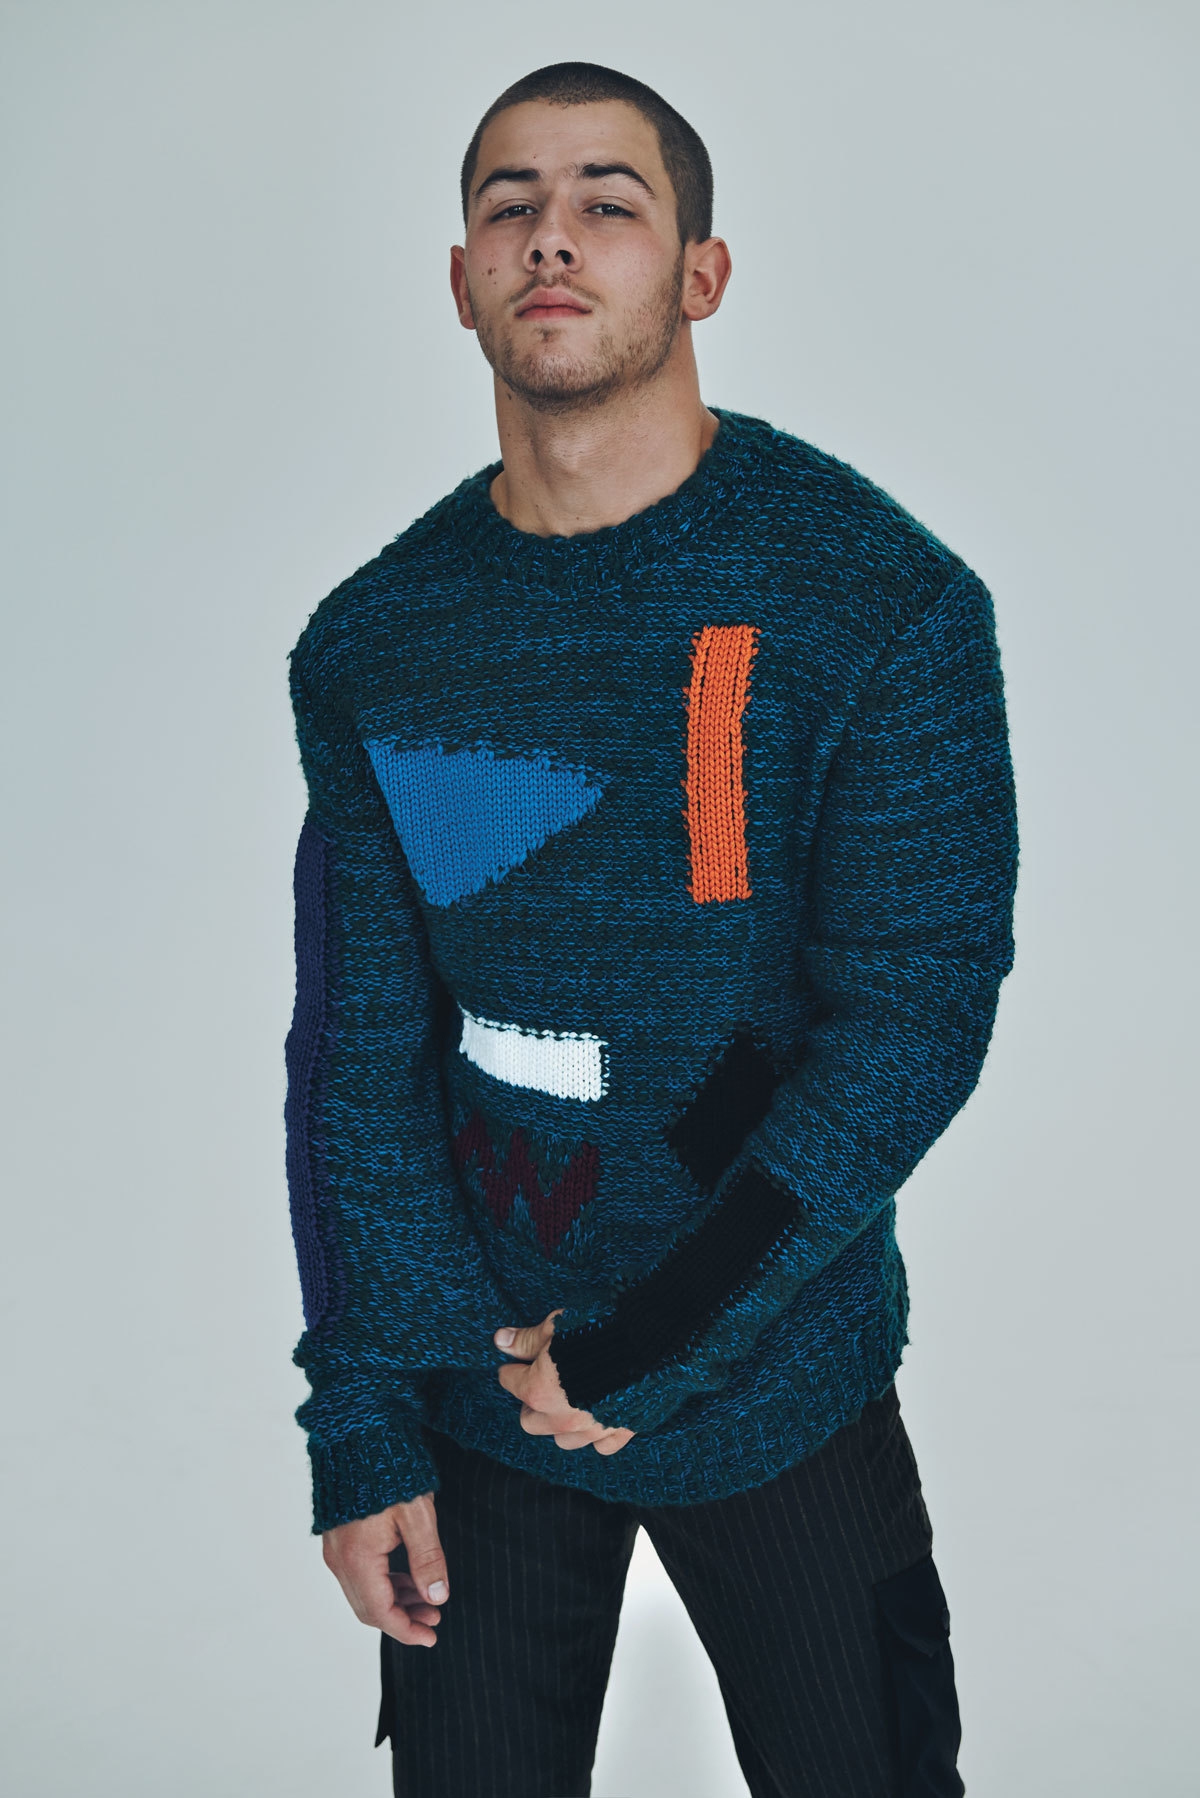 Nick Jonas Poses for i-D, Talks Supporting Gay Community